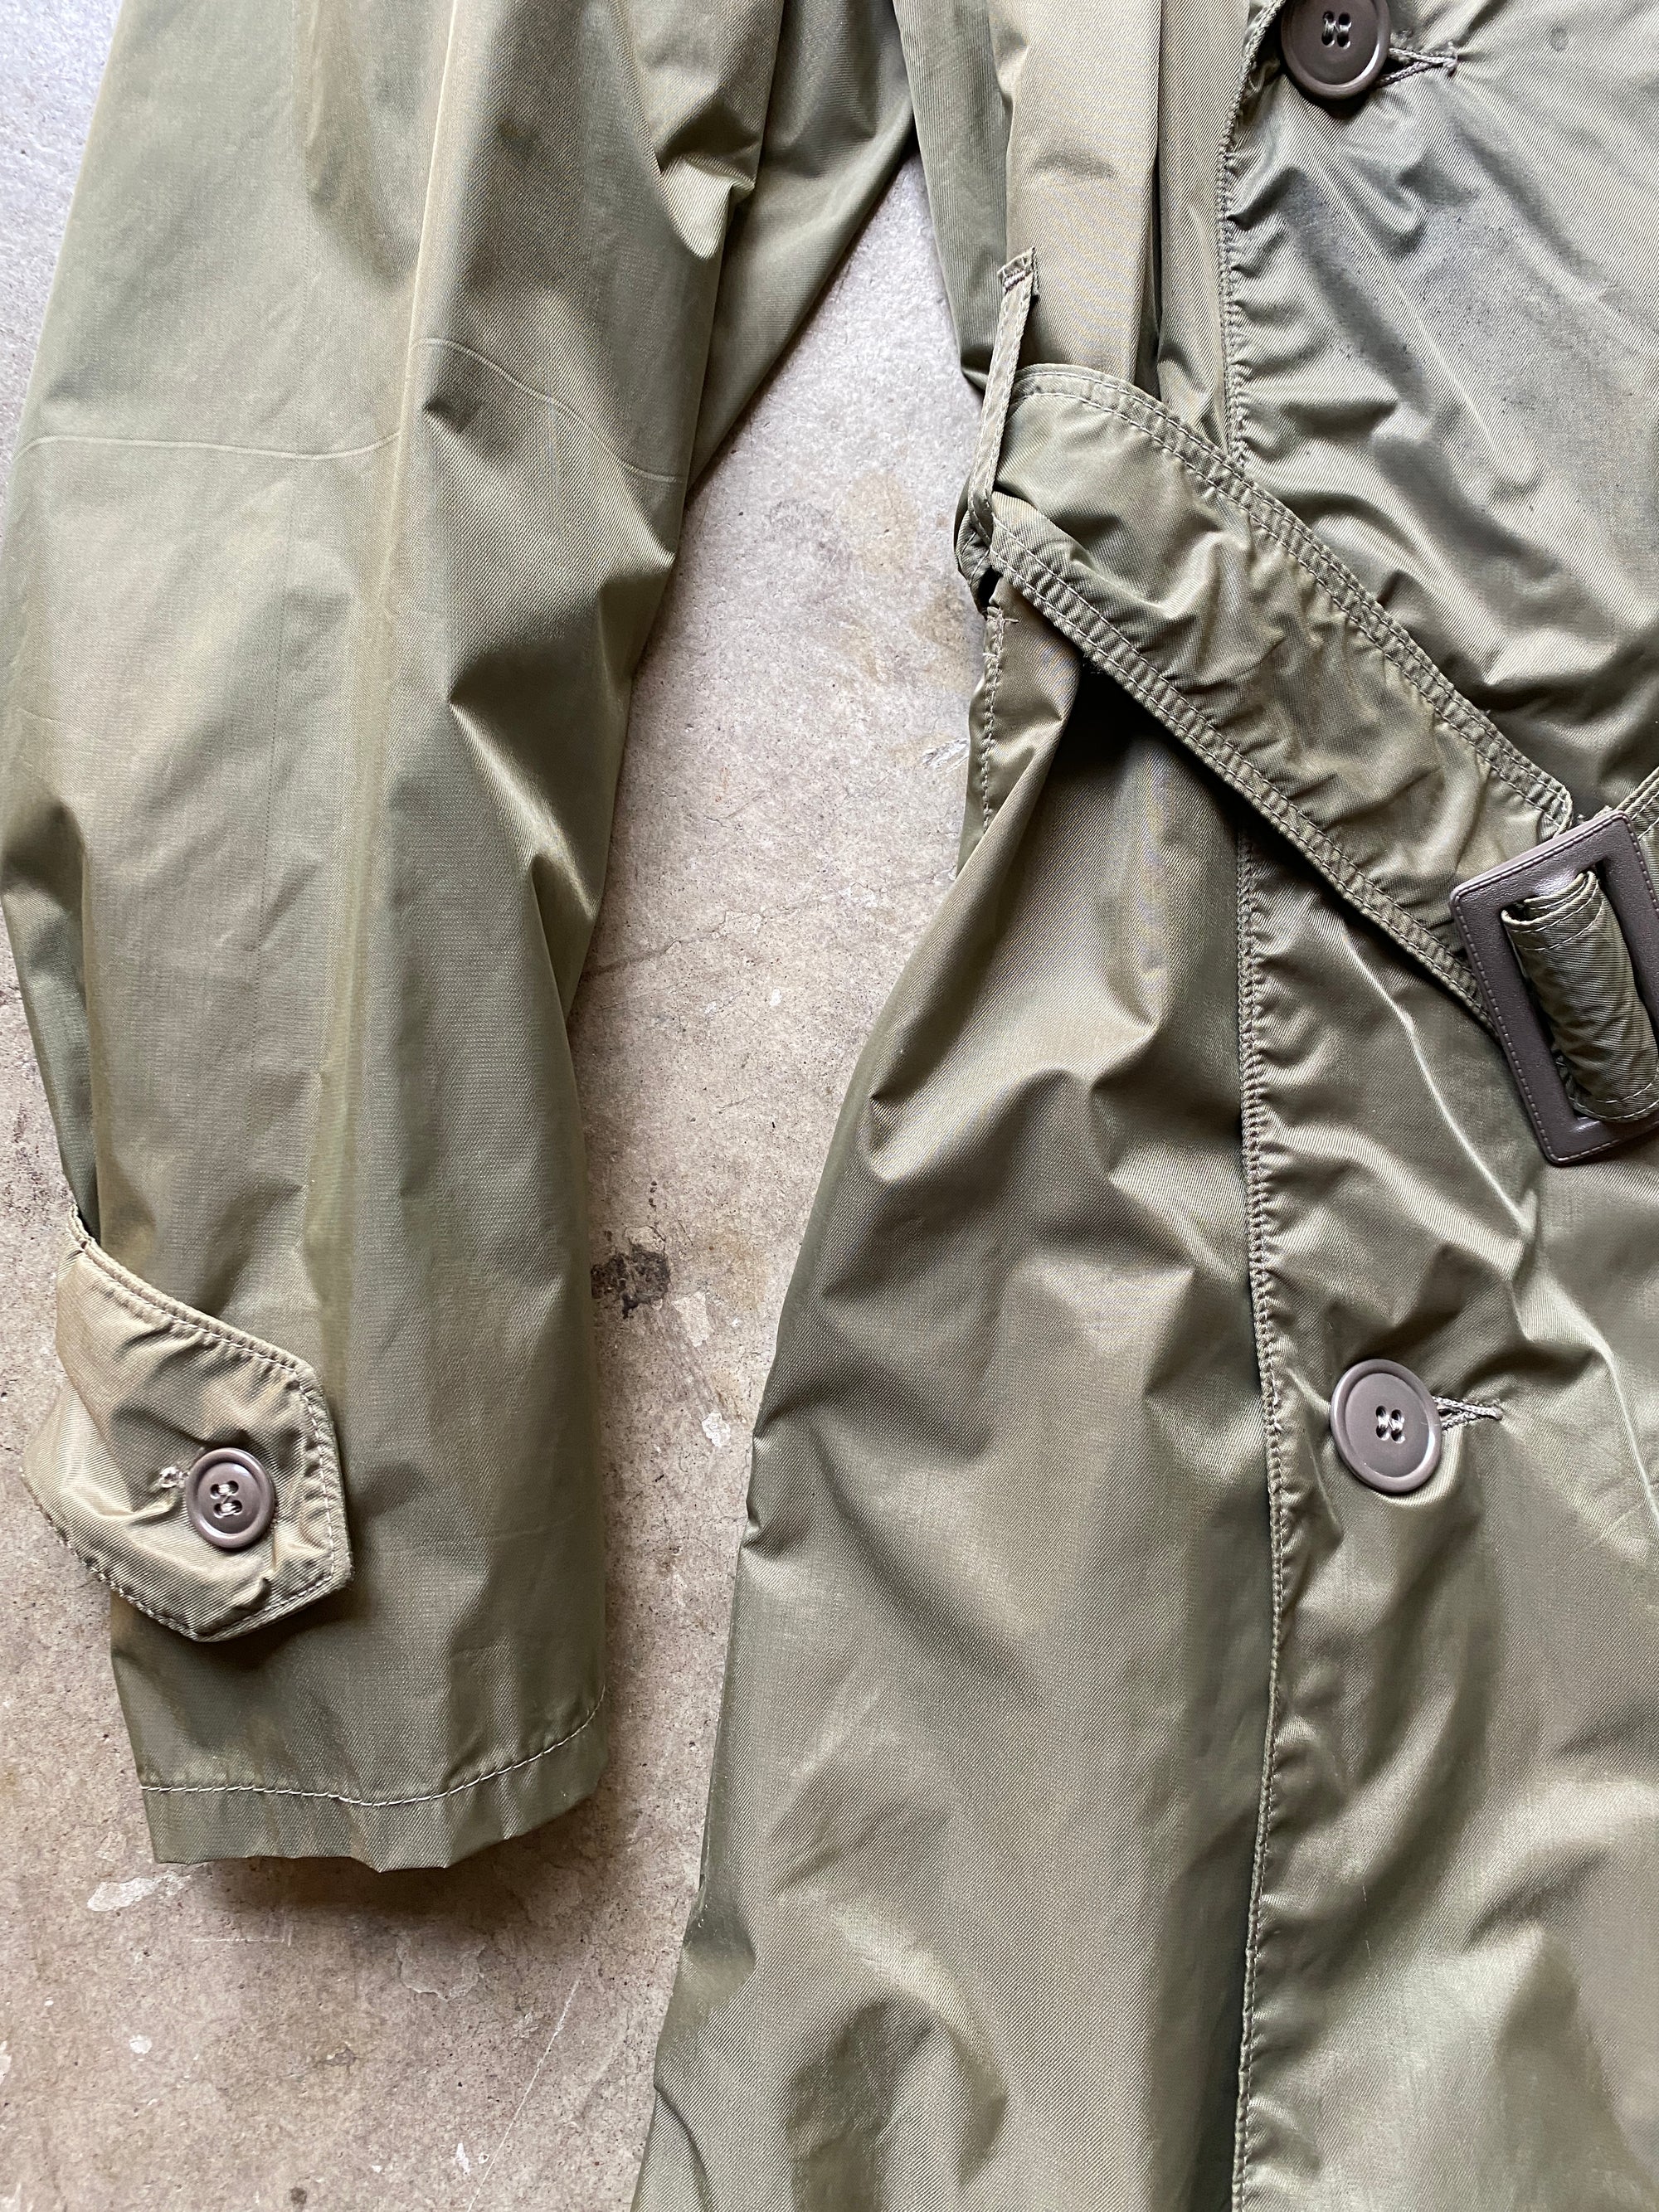 Olive Military Issue Rain Trench Coat